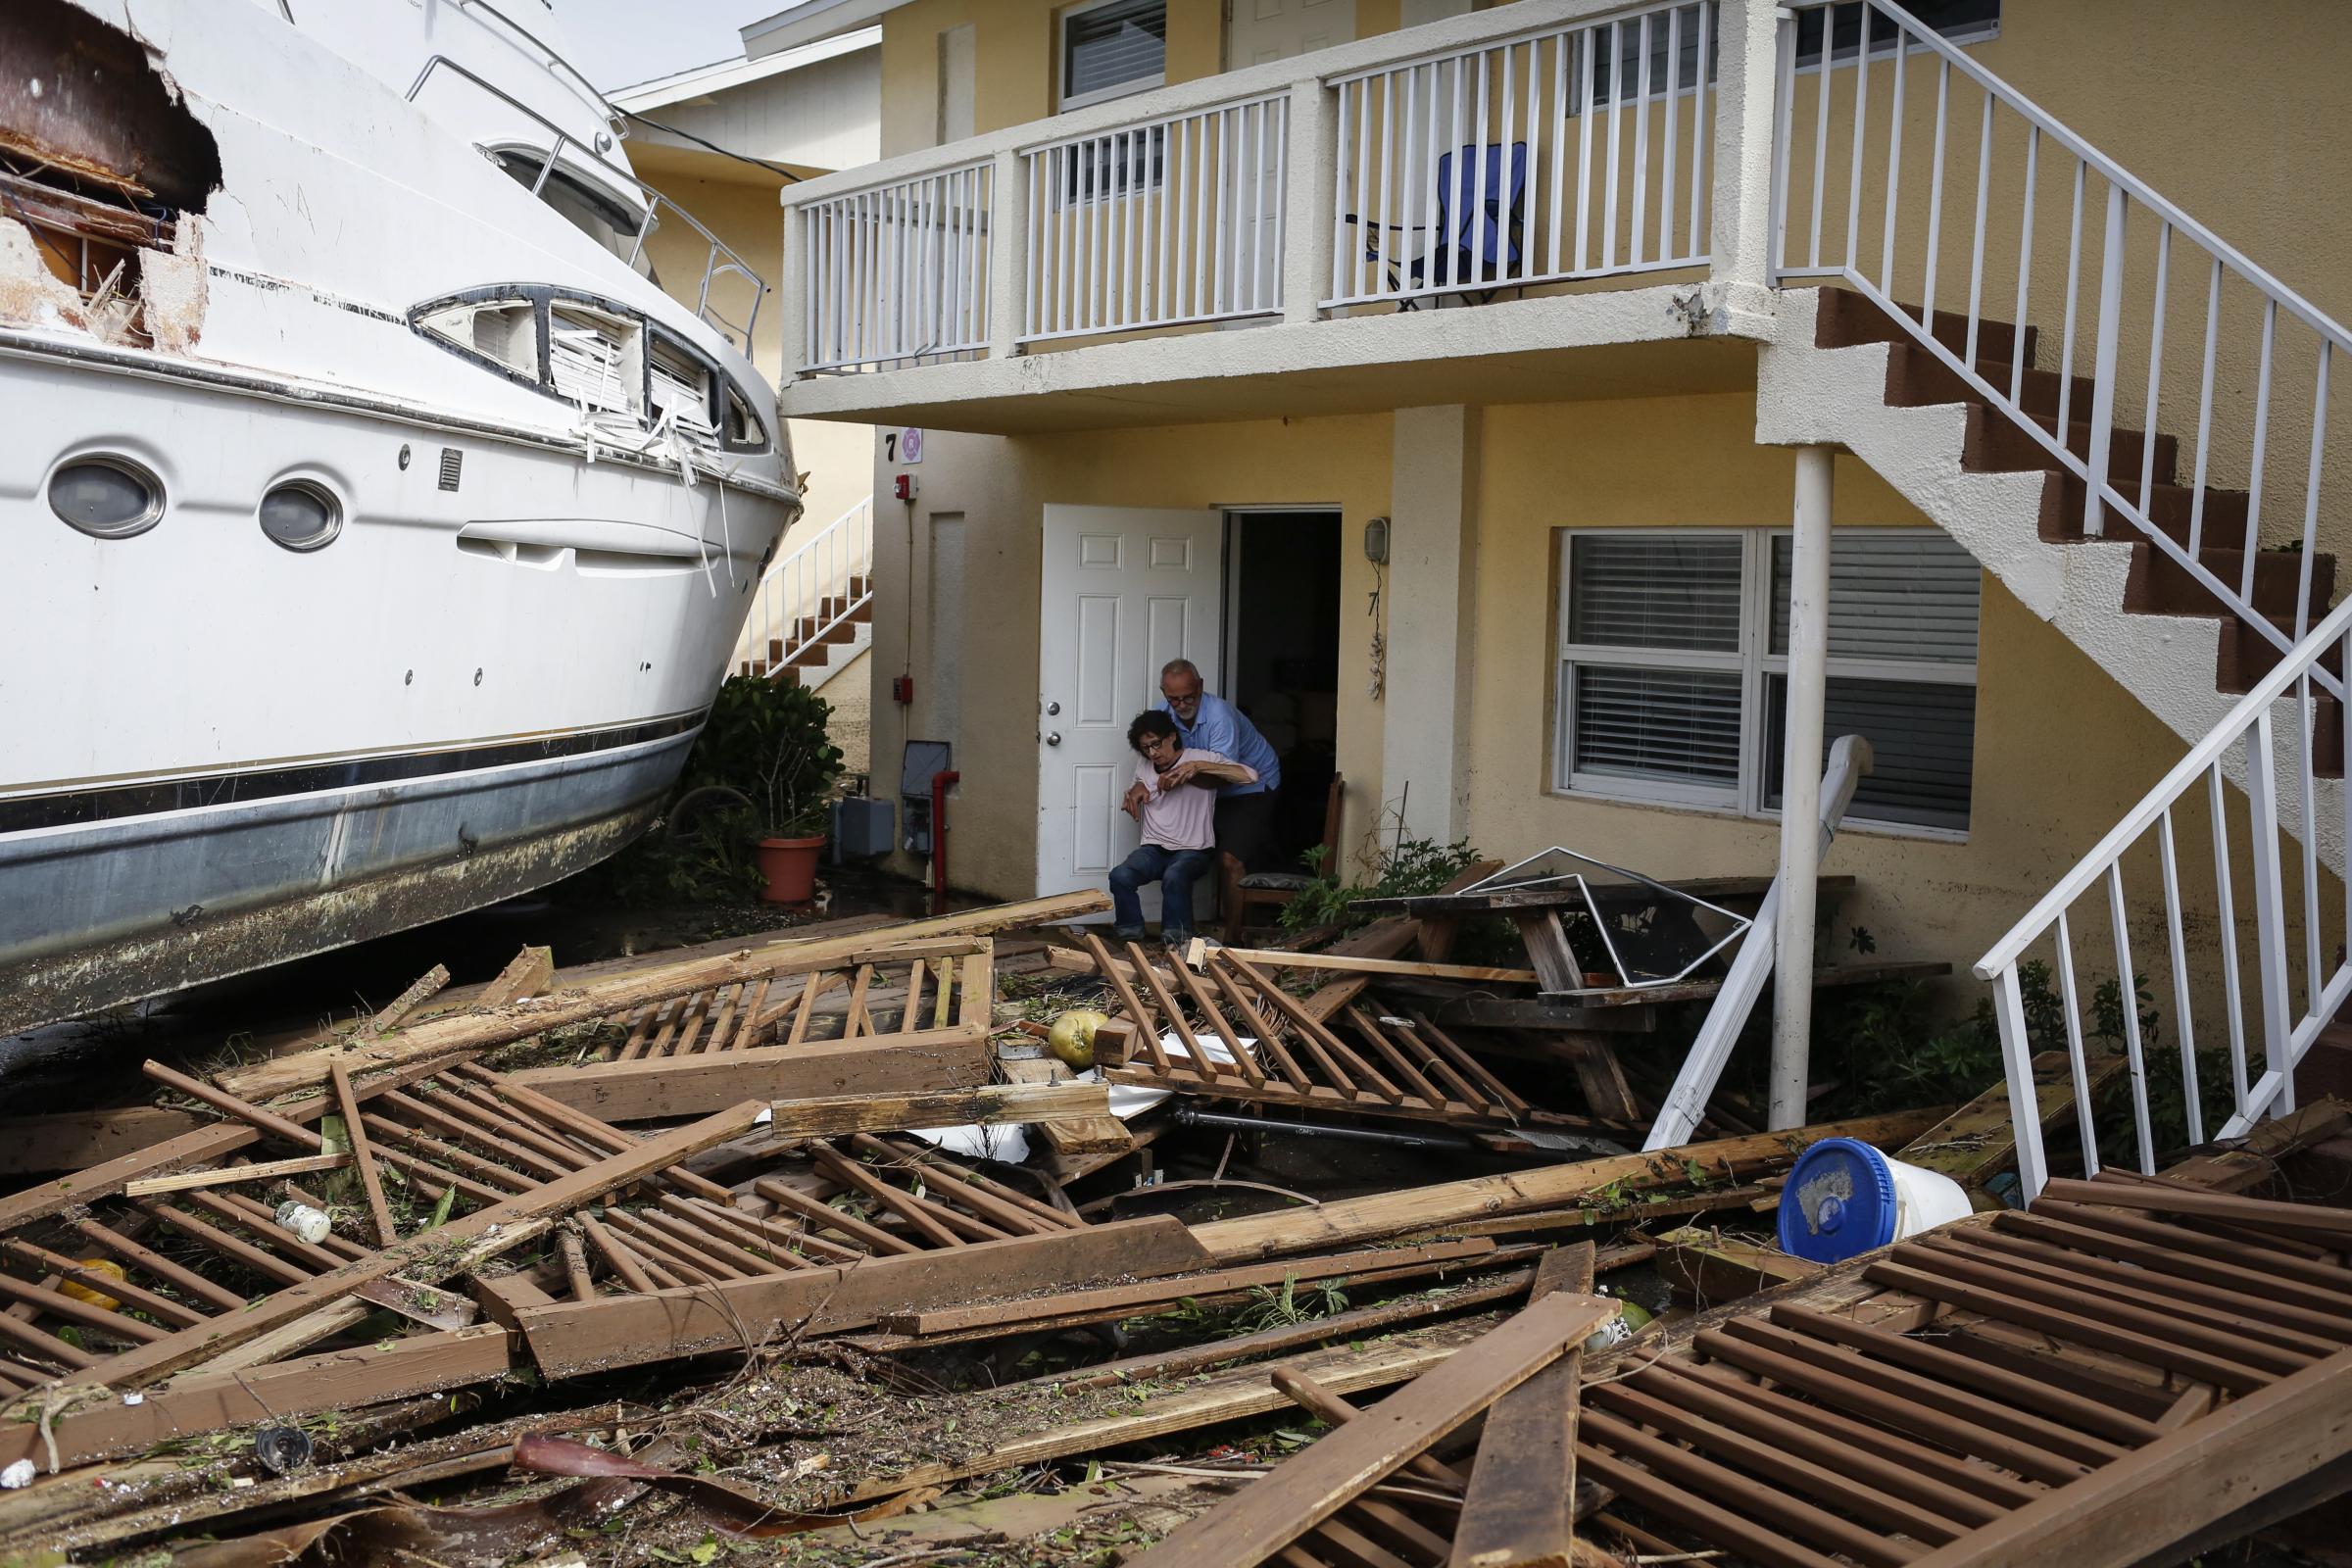 slideshow - A man helps a woman next to a damaged boat amid a downtown condominium after Hurricane Ian caused...